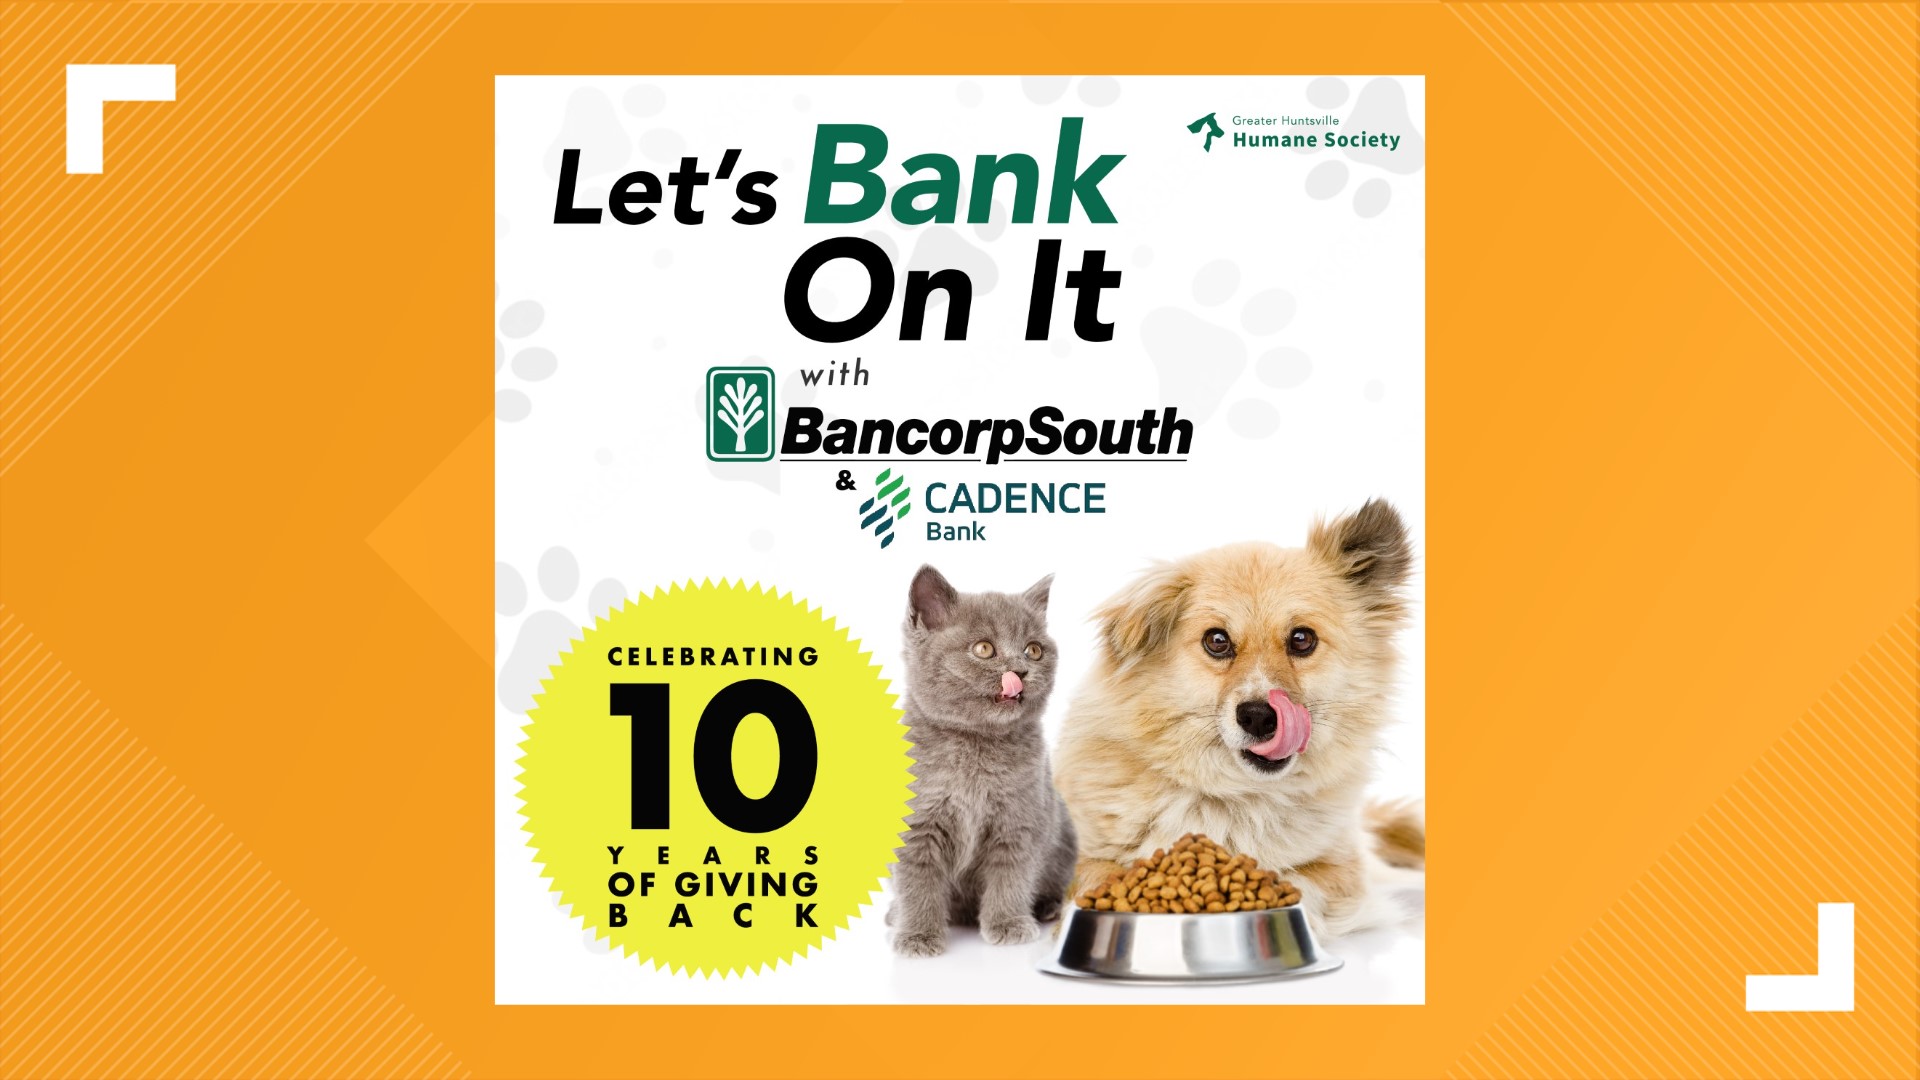 Drop off your pet food donation at any BancorpSouth or Cadence Bank location or at the Greater Huntsville Humane Society building.